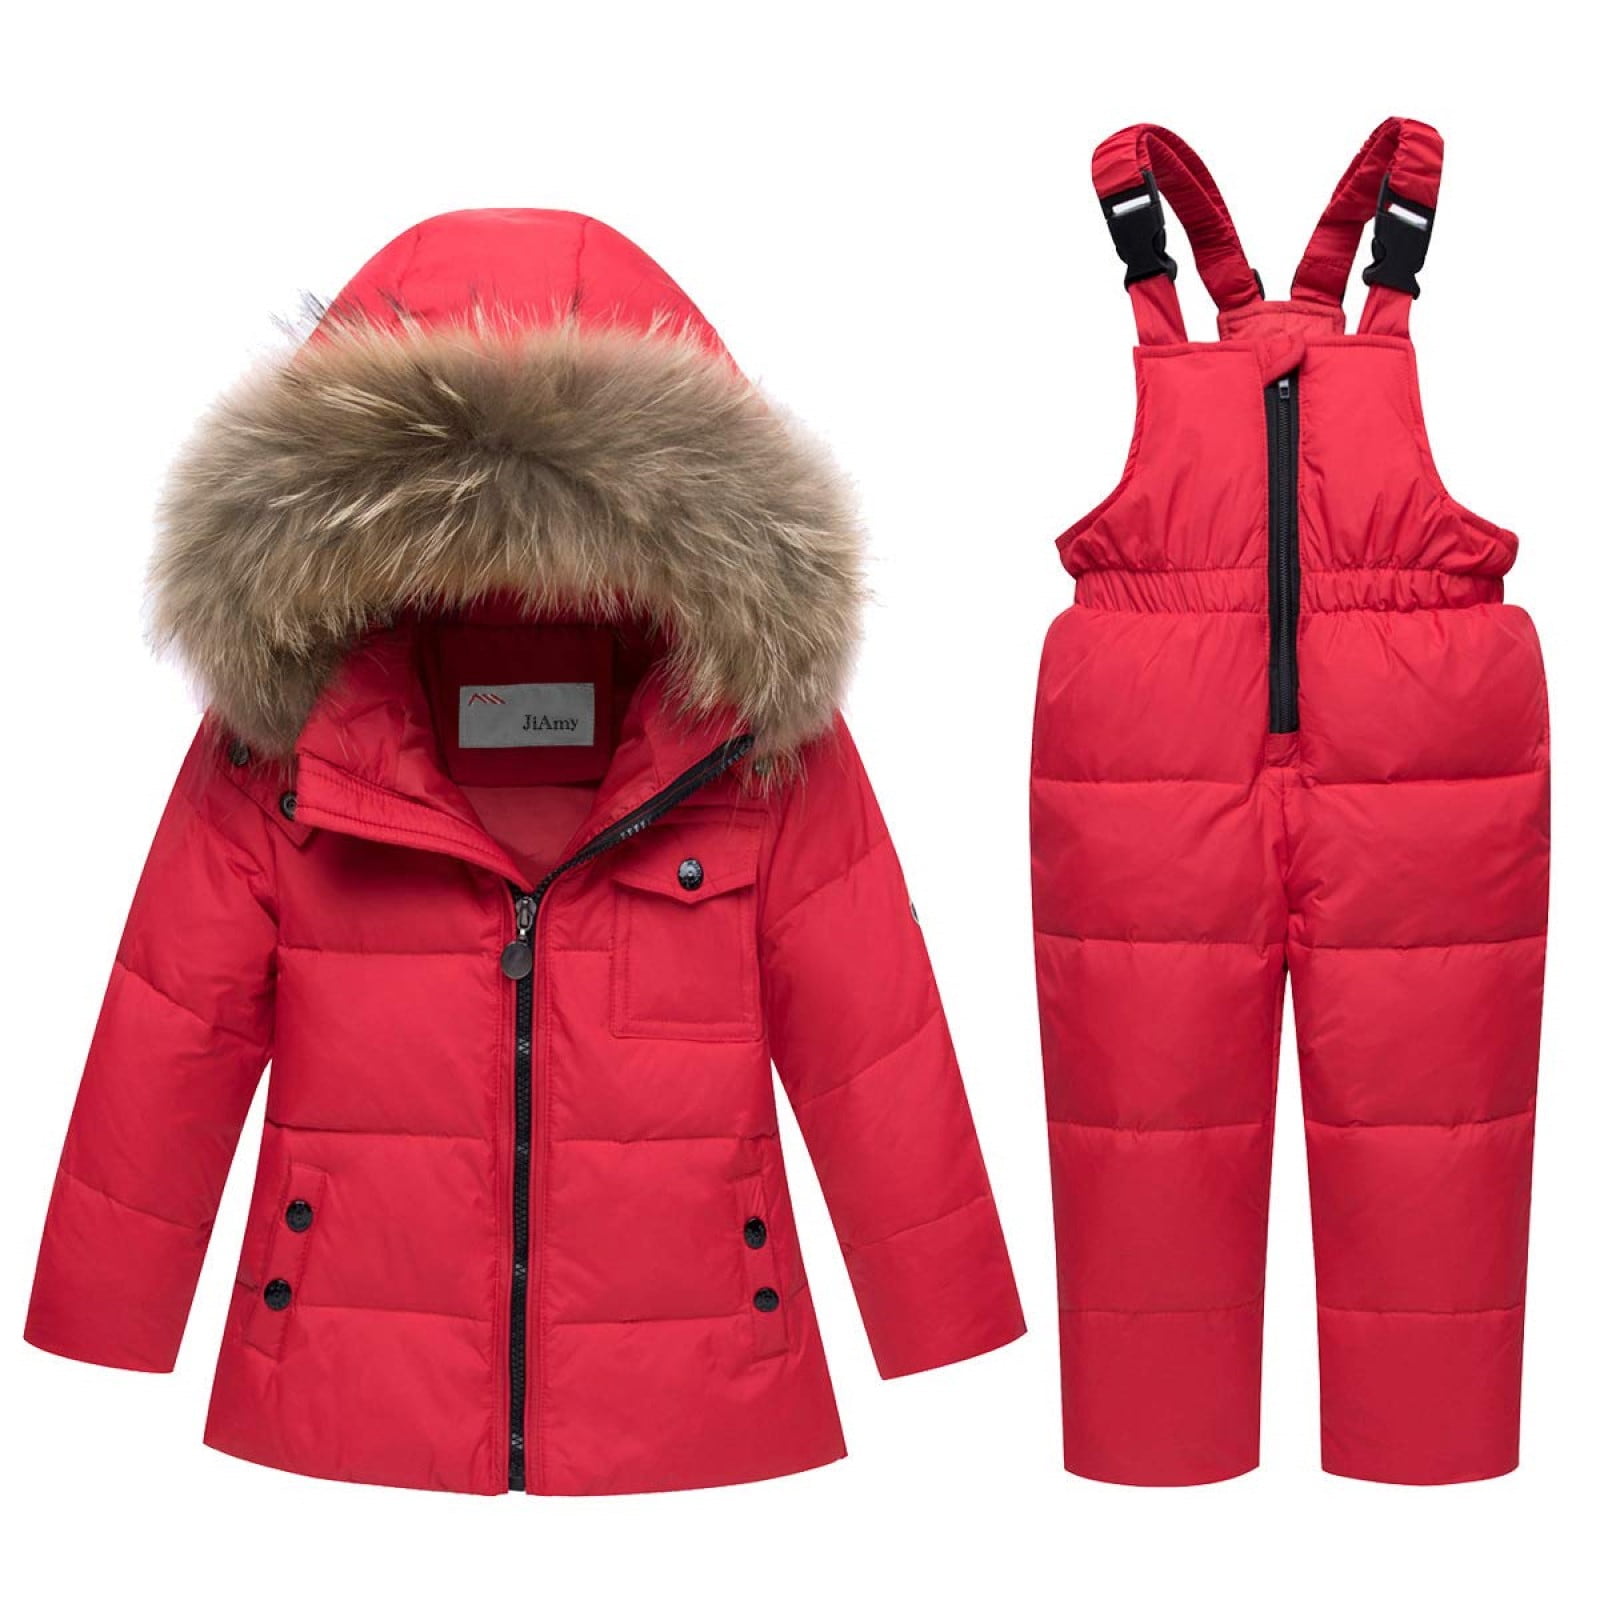 Balipig Kids Winter Puffer Jacket and Snow Pants 2-Piece Snowsuit Down  Skisuit Set Hooded Coat Ski Trousers 1-5 Years